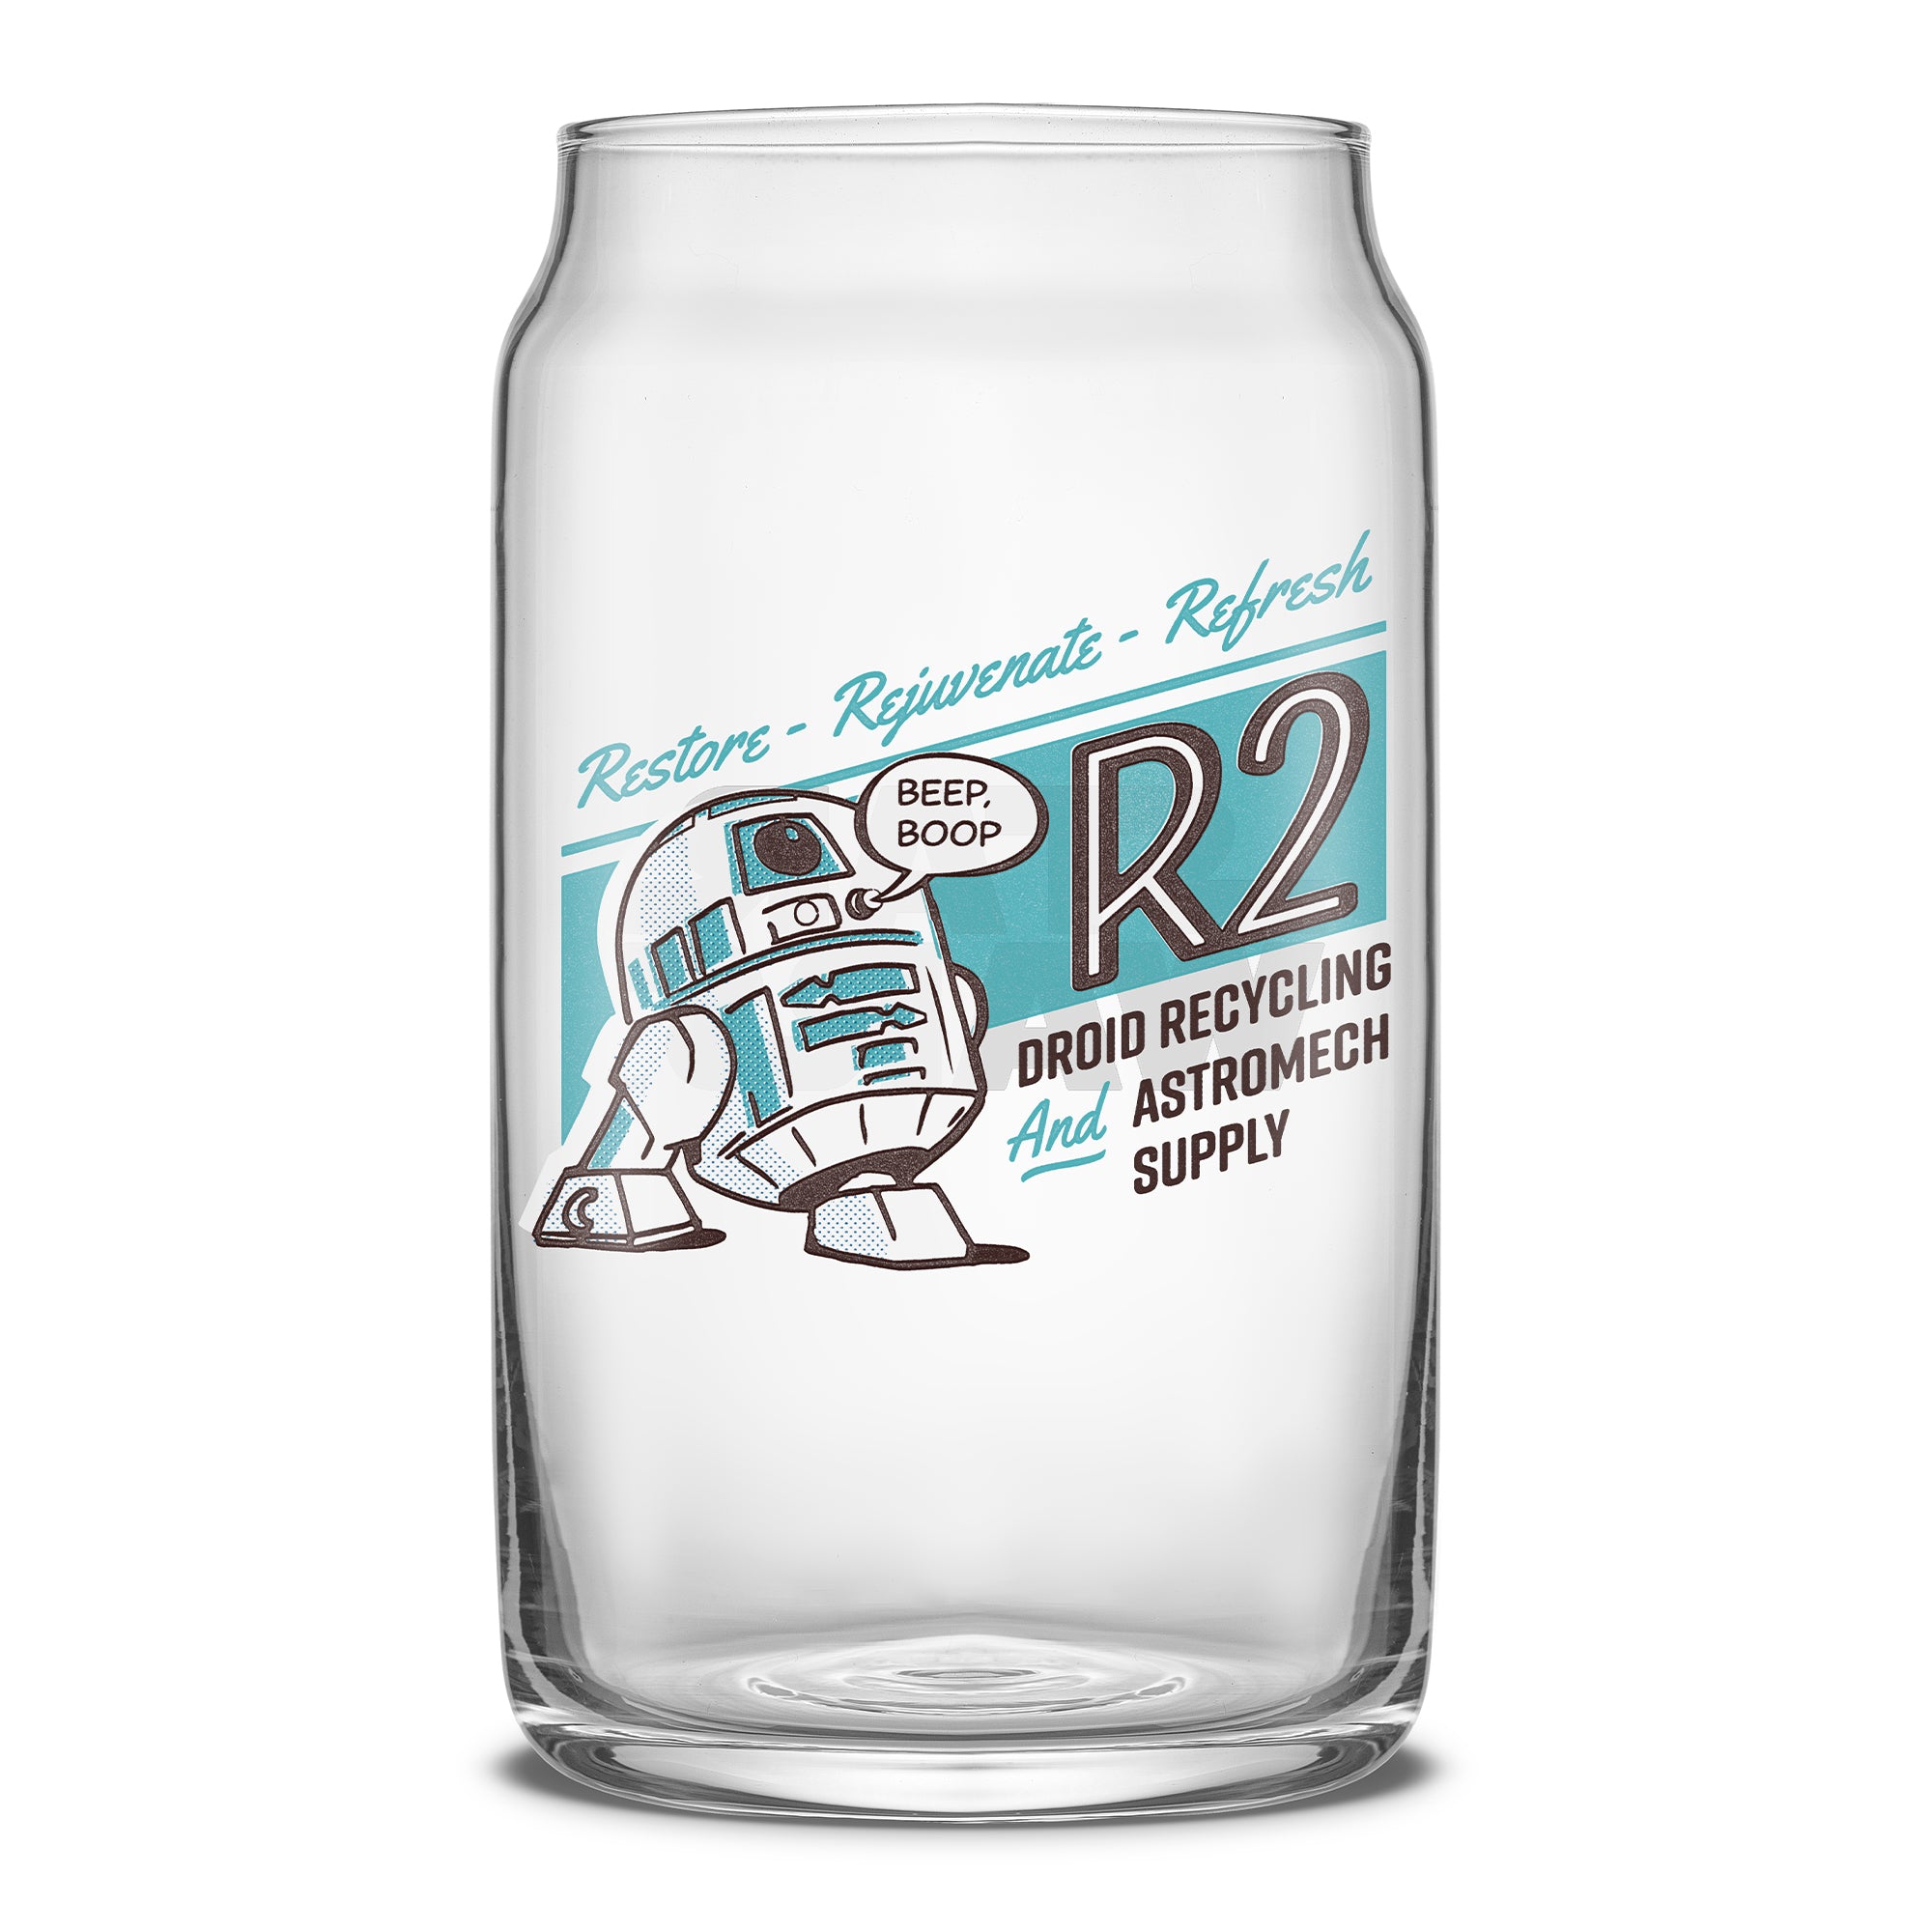 Retro-inspired Star Wars can-shaped drinking glasses featuring R2D2.